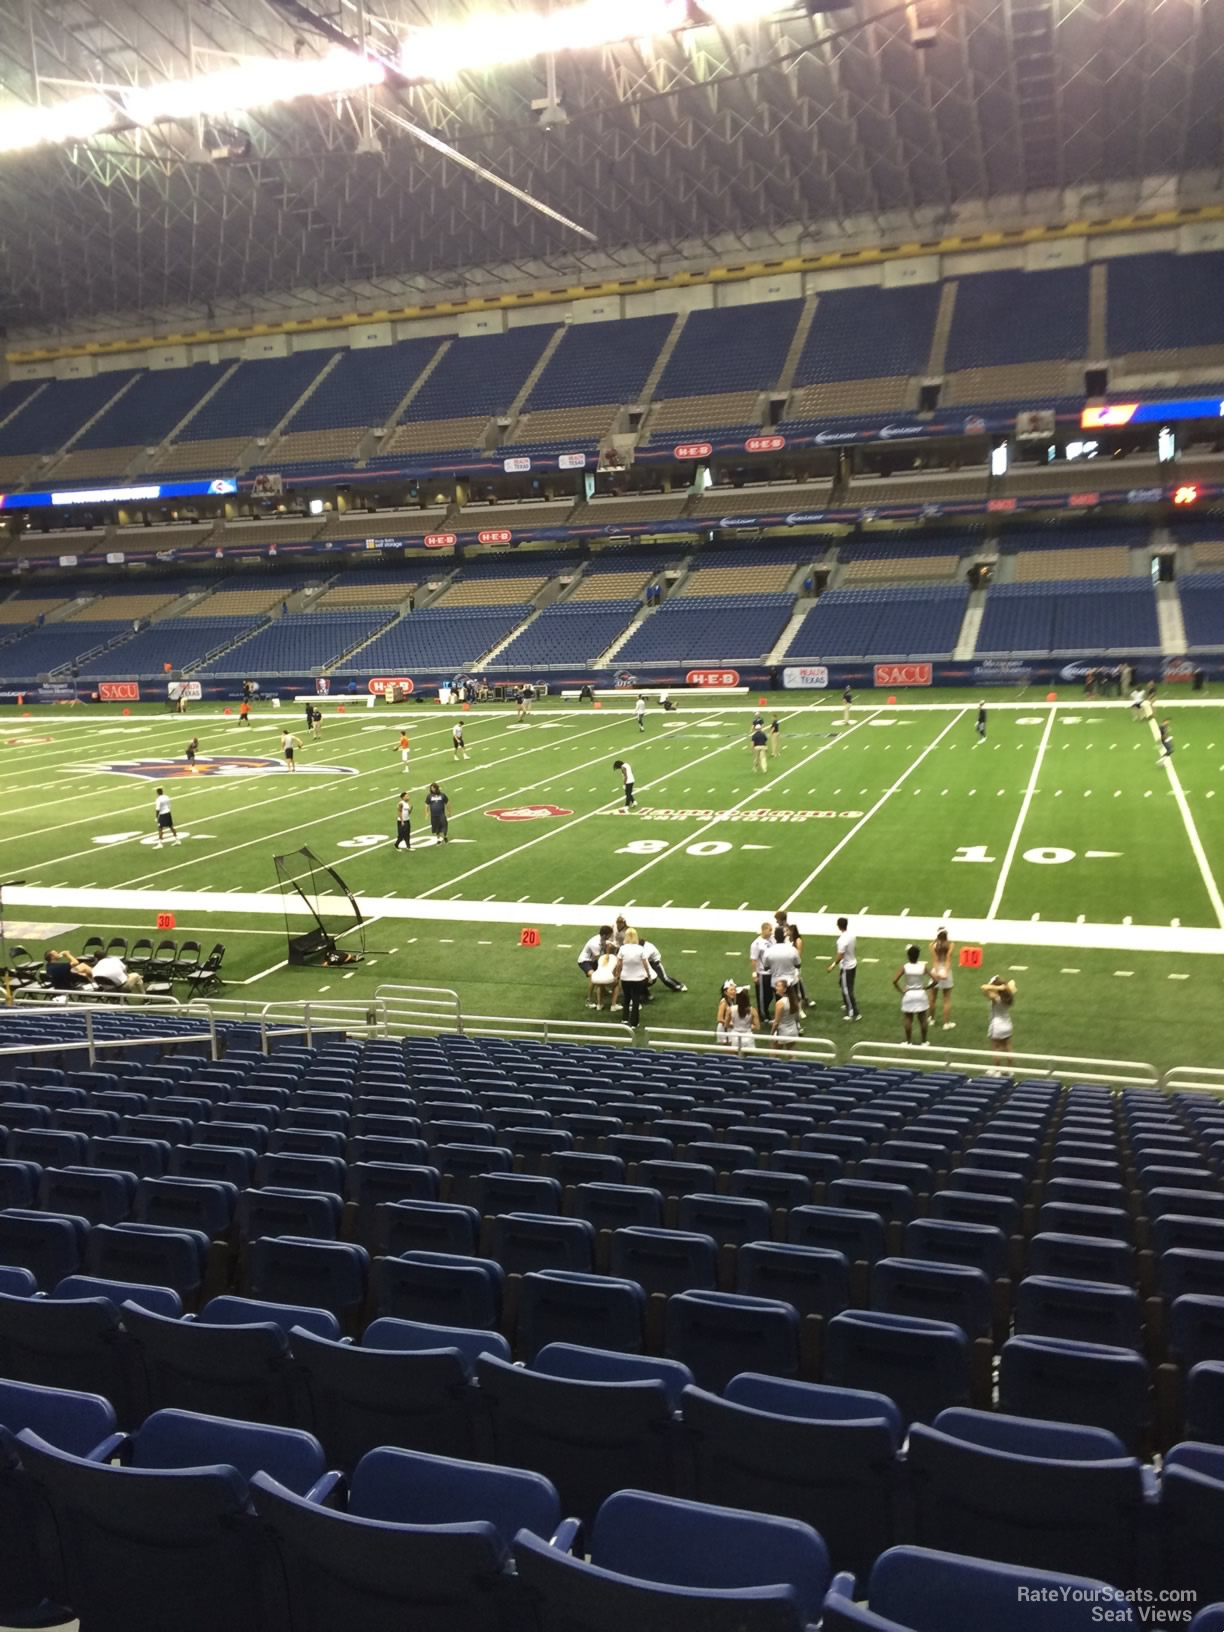 section 109, row 18 seat view  for football - alamodome